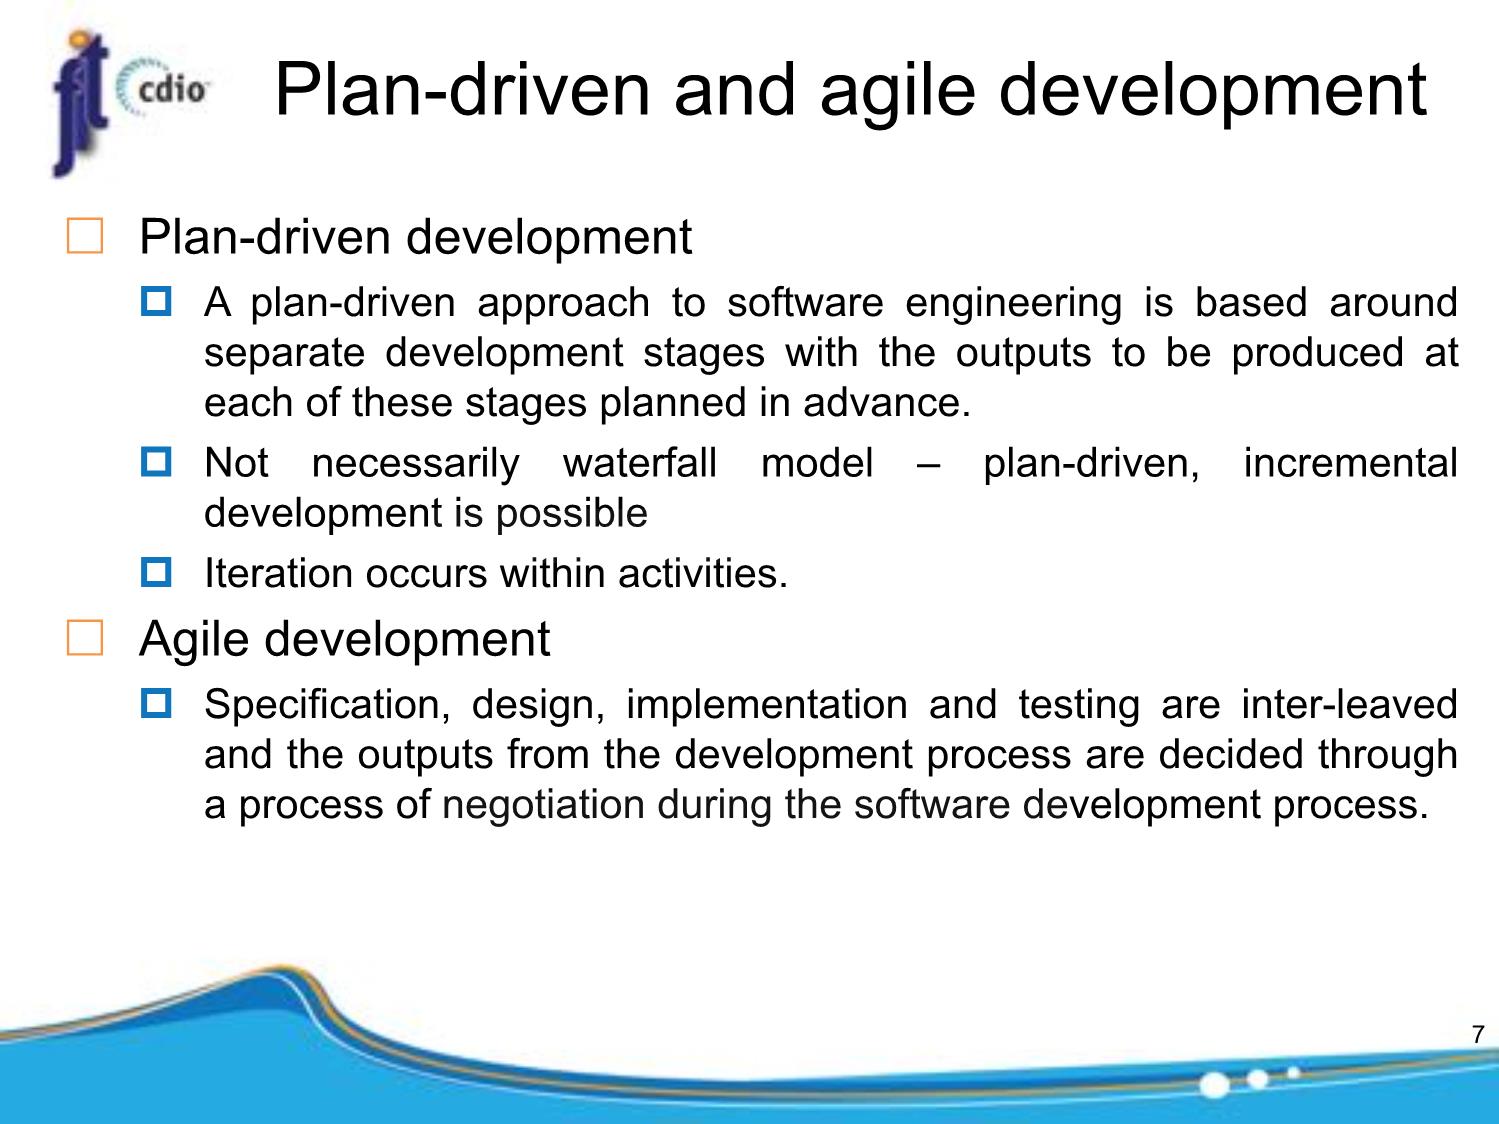 Bài giảng Introduction to Software Engineering - Week 10: Agile software development - Nguyễn Thị Minh Tuyền trang 7